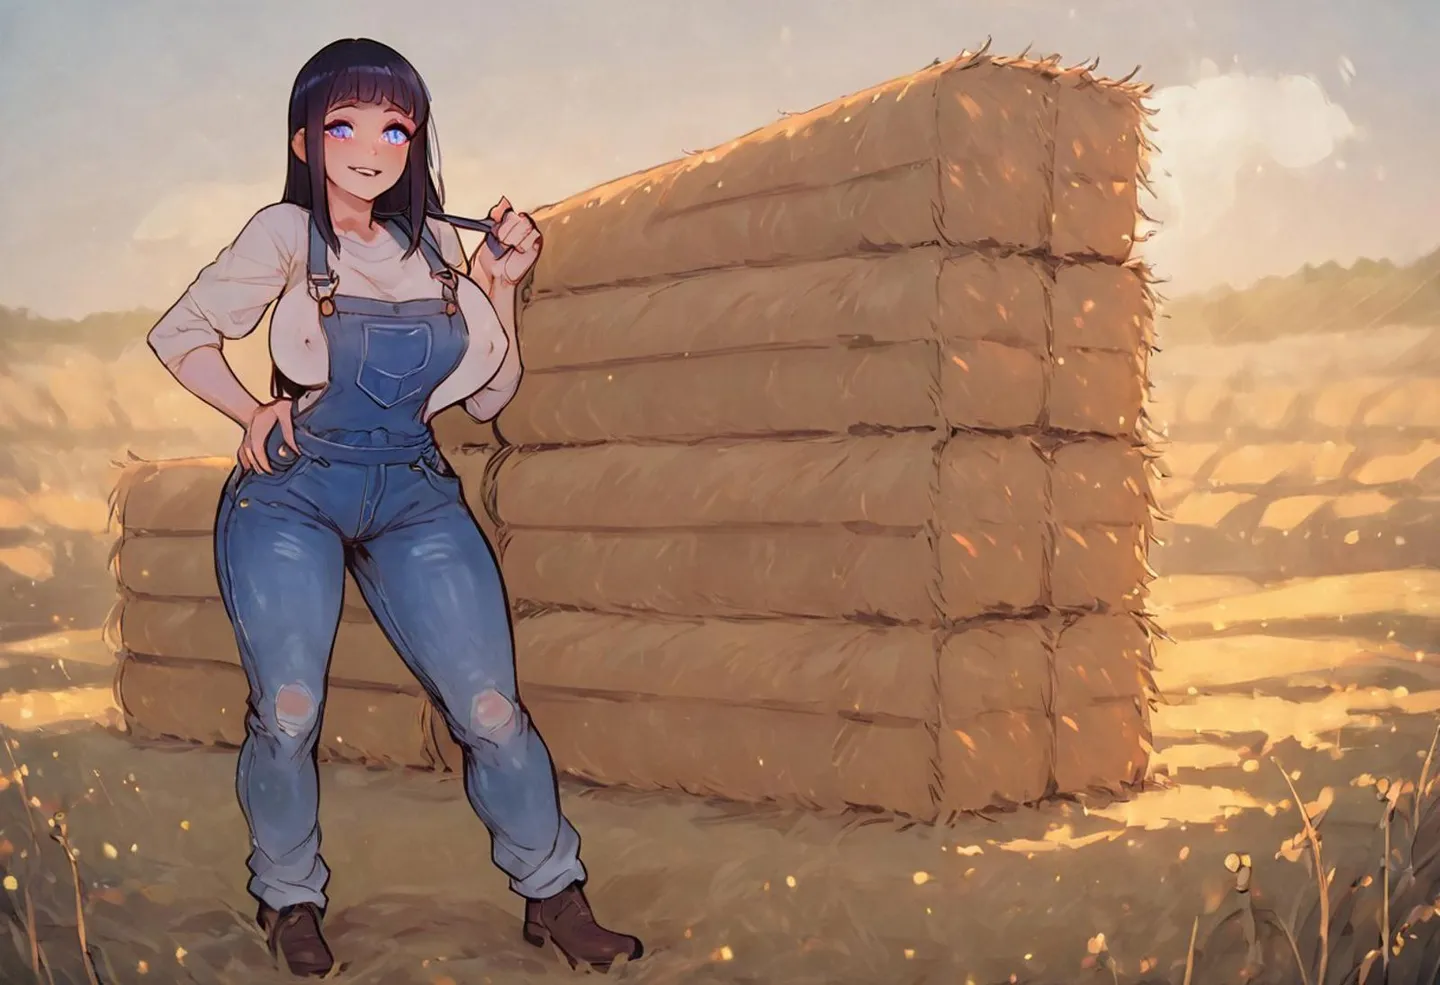 Anime-styled farm girl in denim overalls standing in front of a stack of hay bales, AI generated image using stable diffusion.